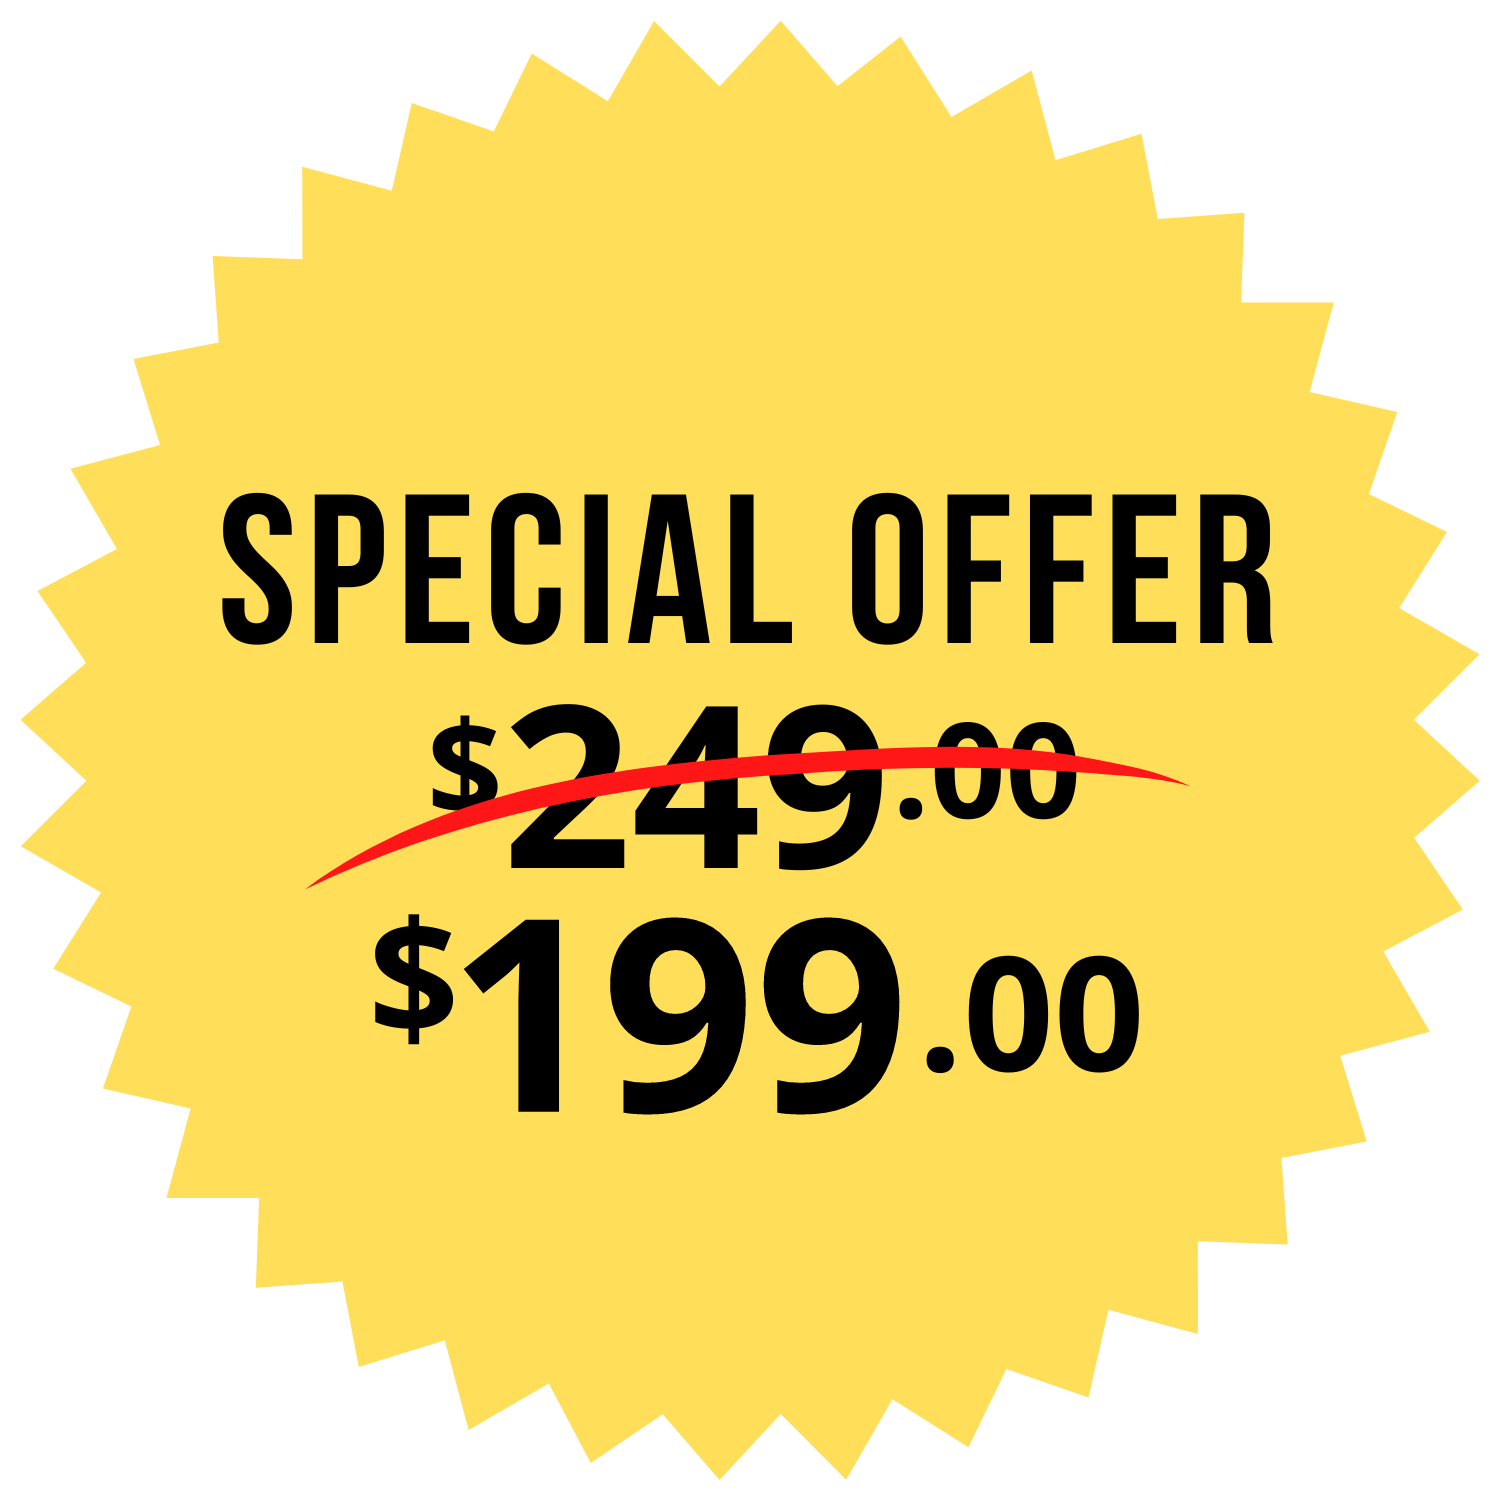 Special Offer: Course on sale for $199